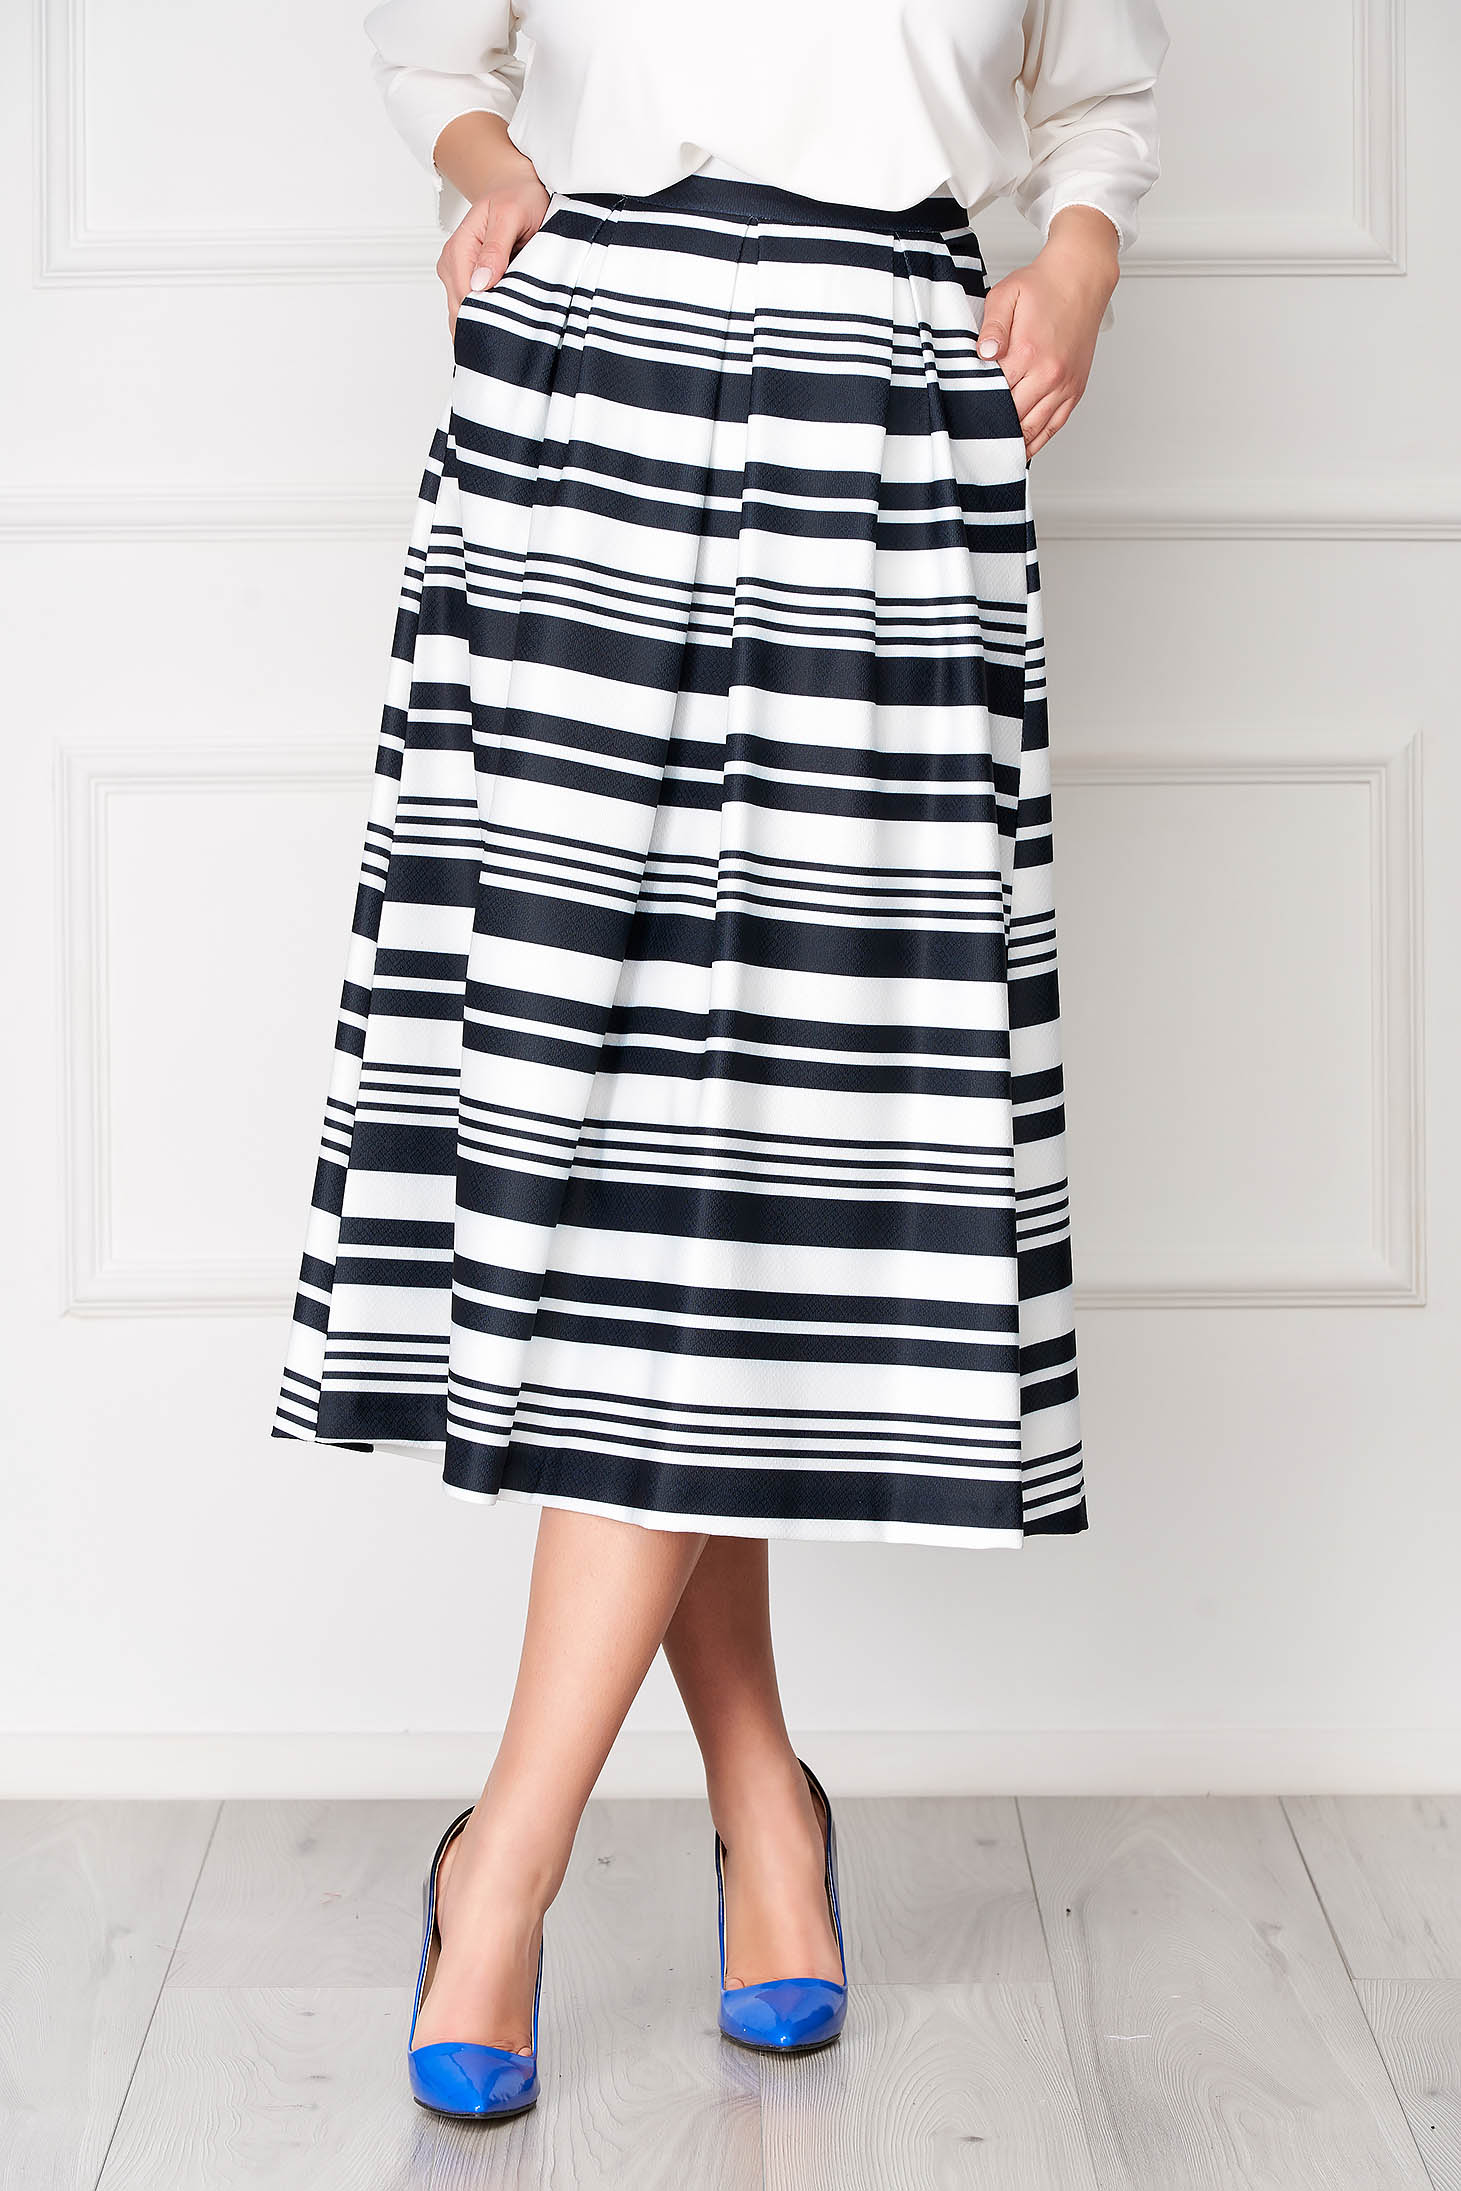 StarShinerS darkblue skirt office midi cloche with pockets with stripes 1 - StarShinerS.com